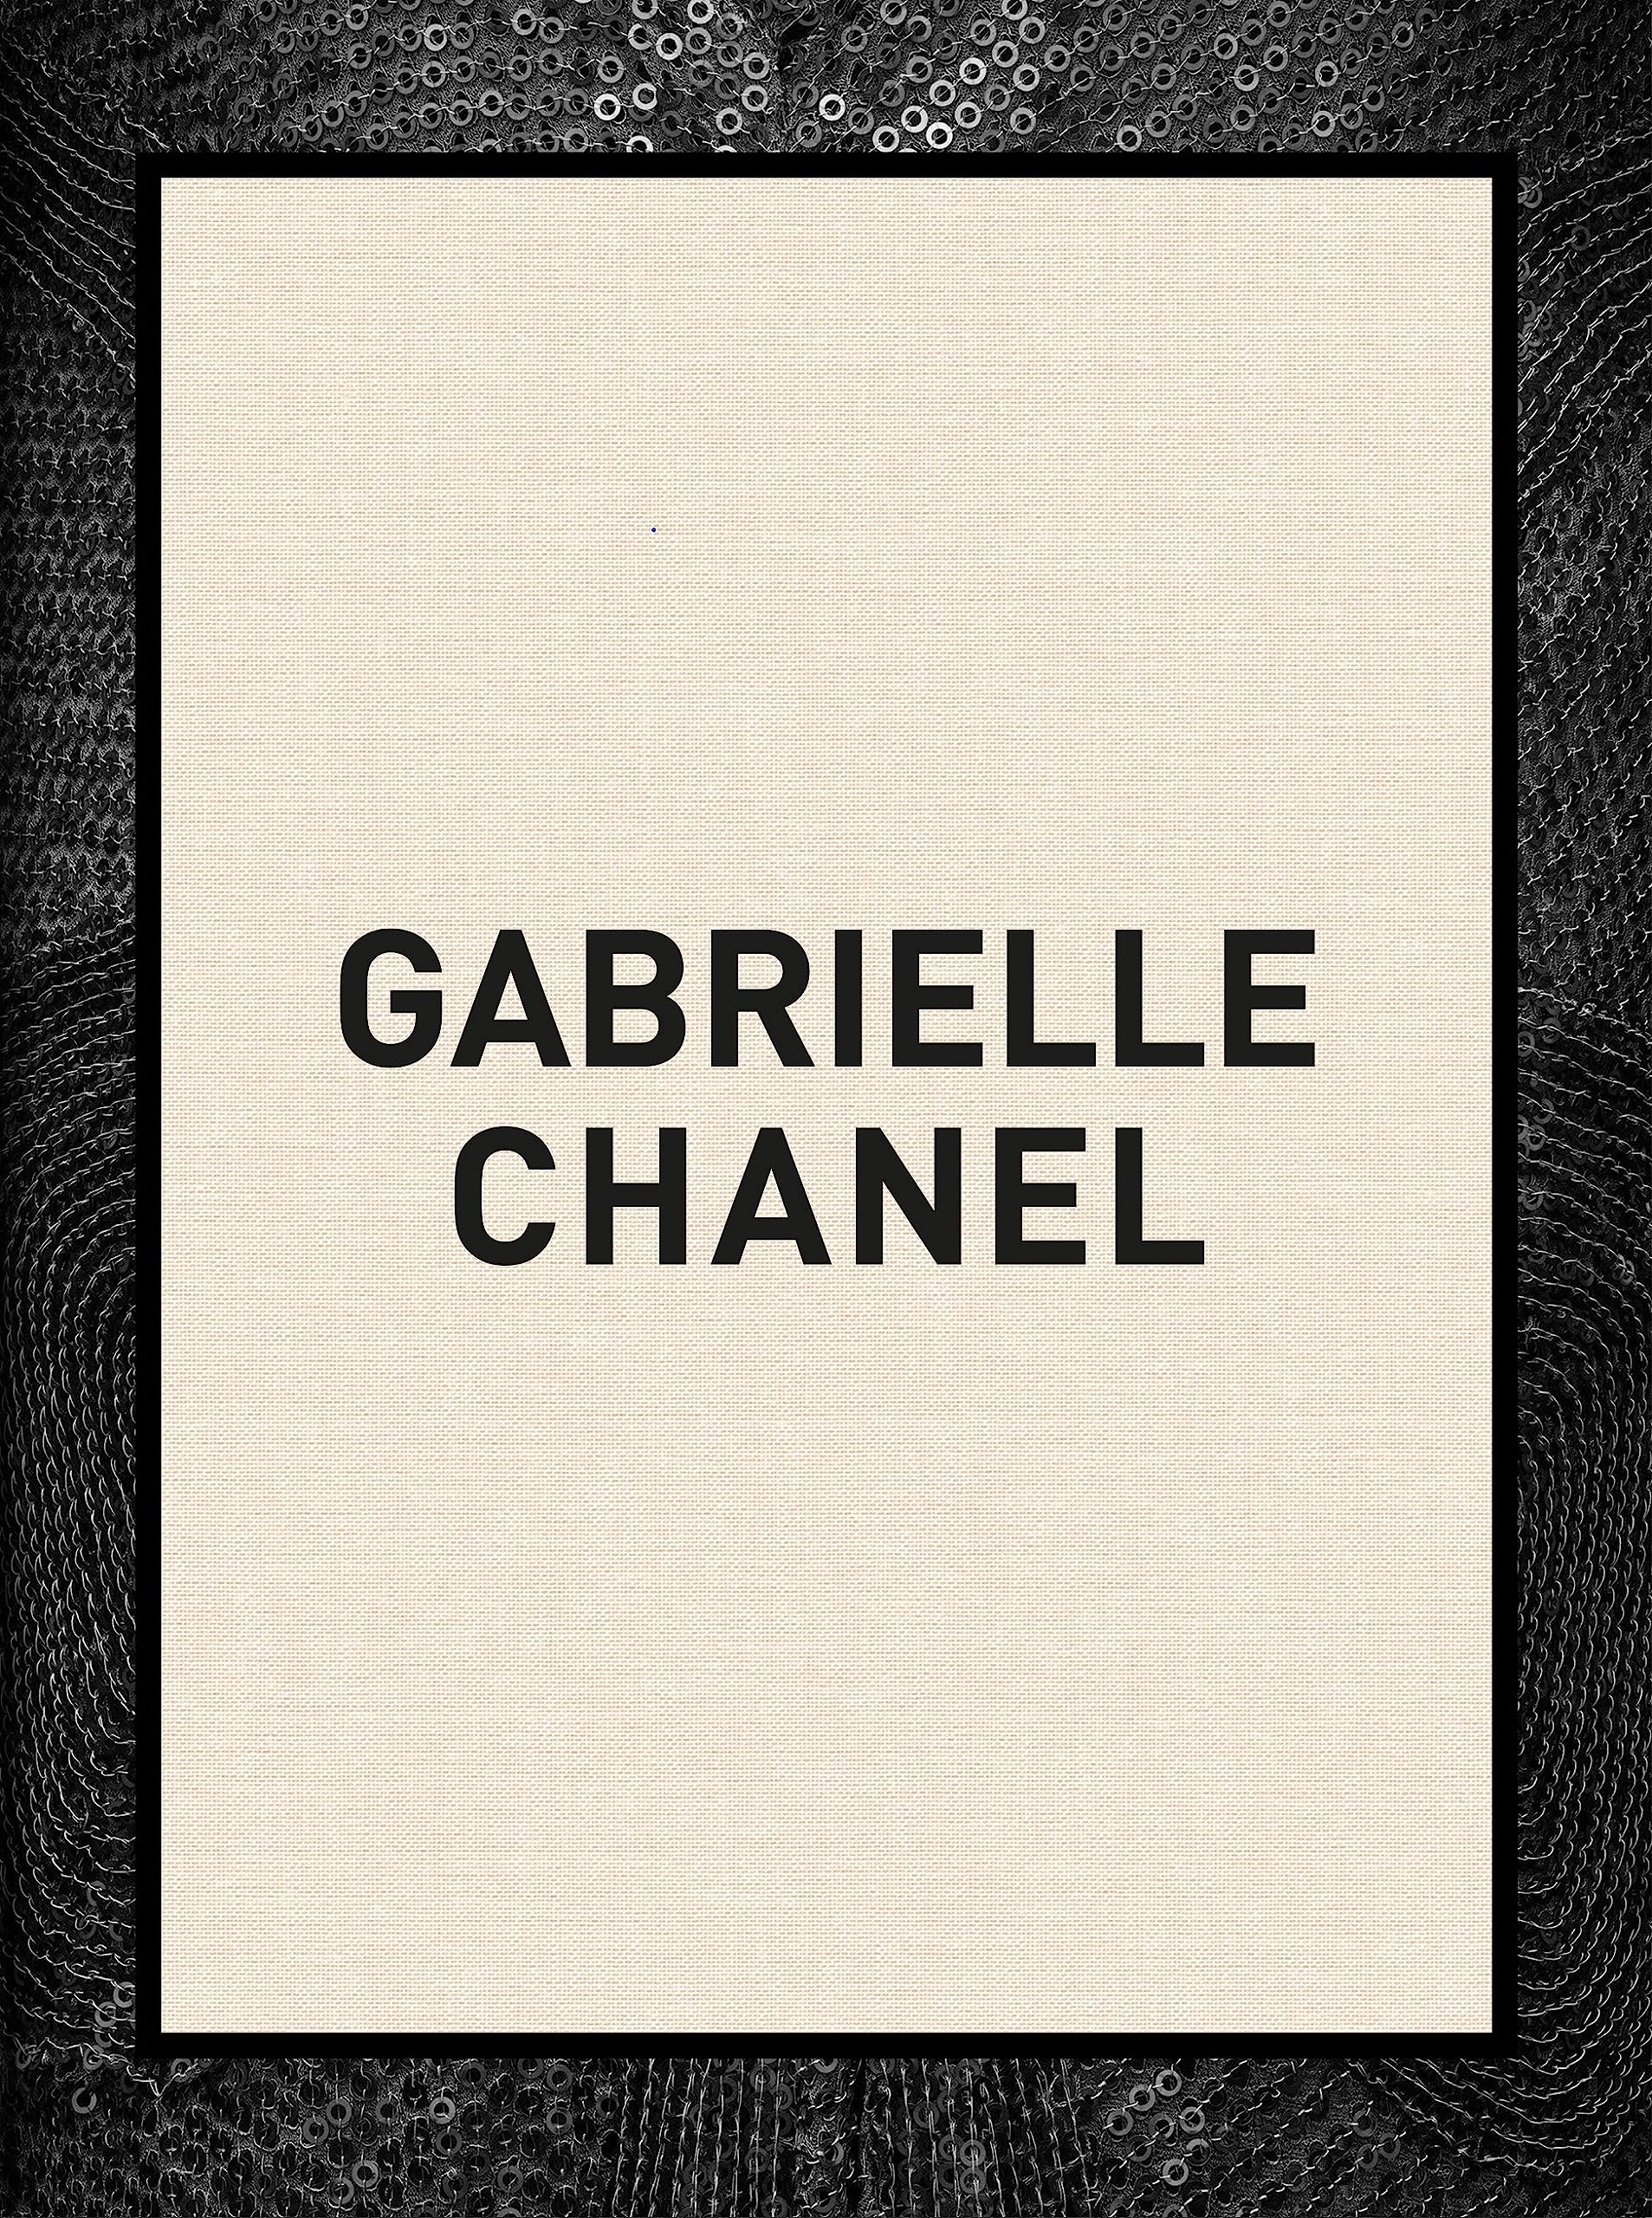 Chanel Catwalk : The Complete Collections 9780500023440